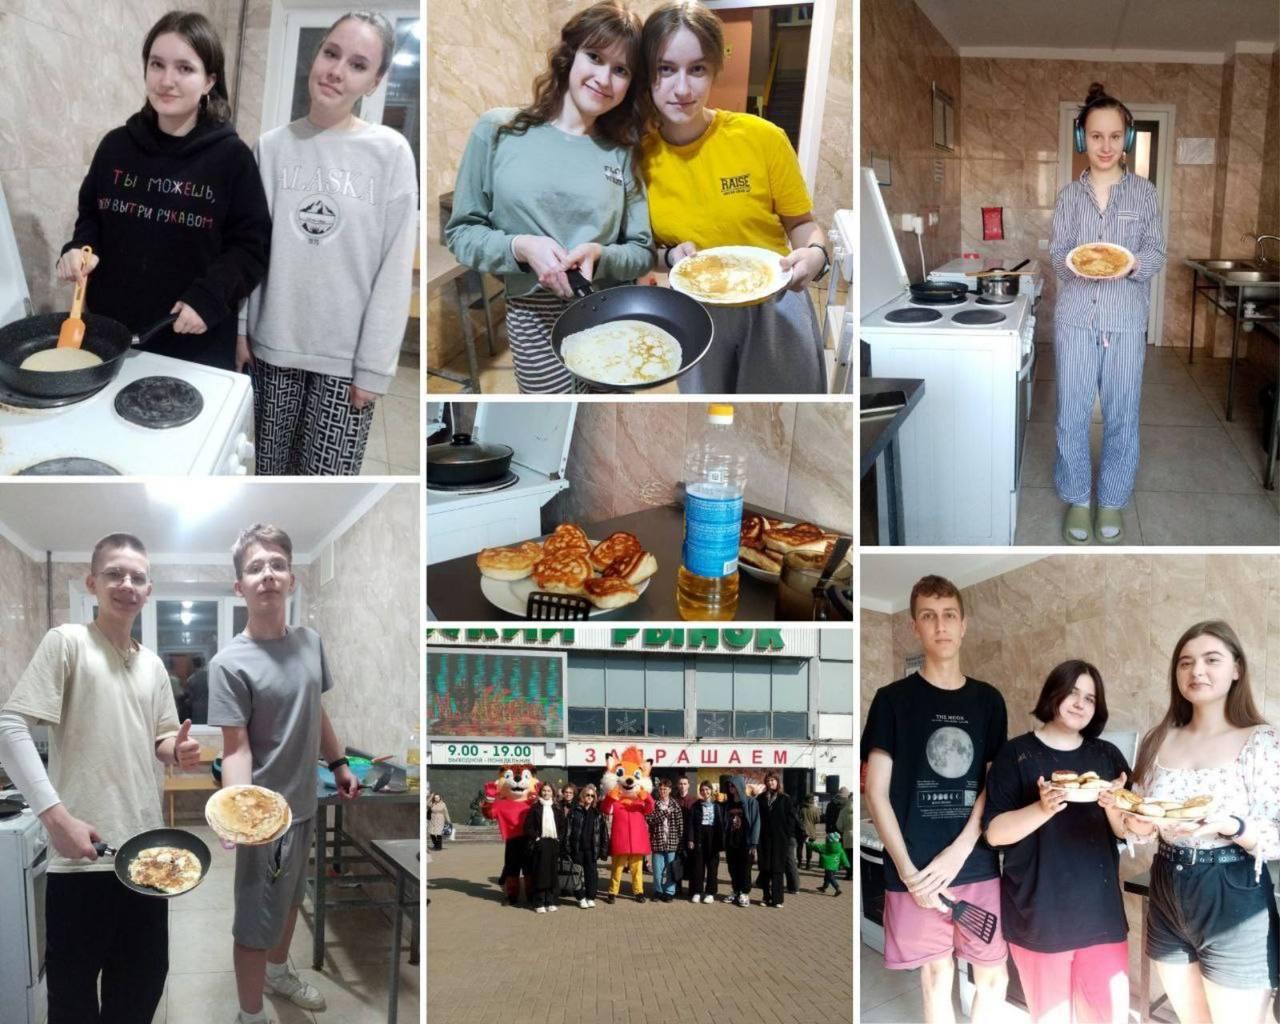 Maslenitsa week in the dormitory of the Minsk Radio Engineering College